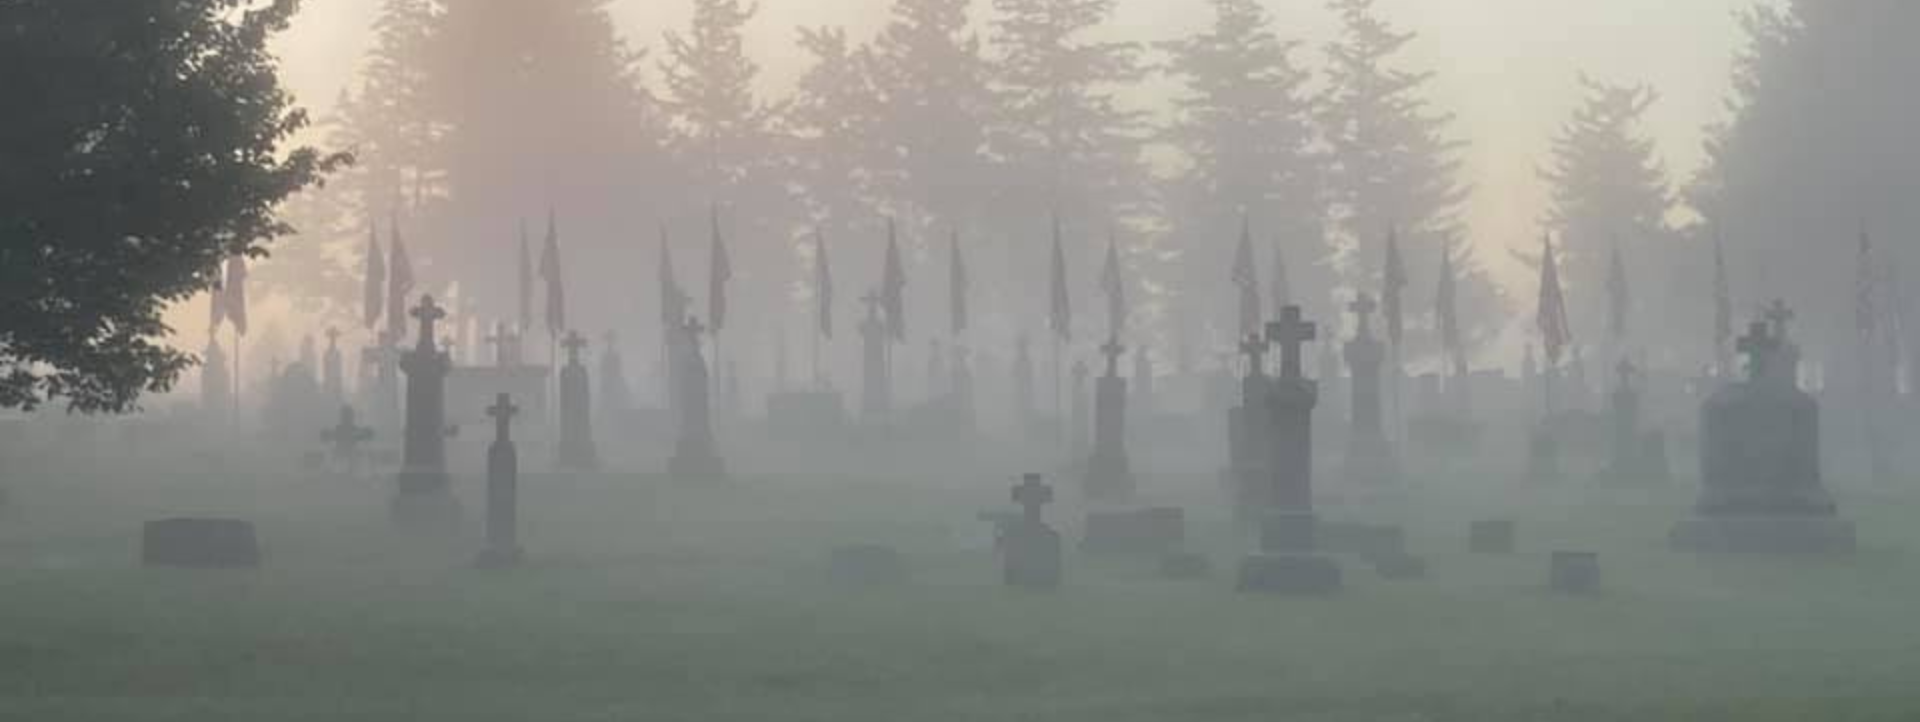 Foggy Morning by Cemetery